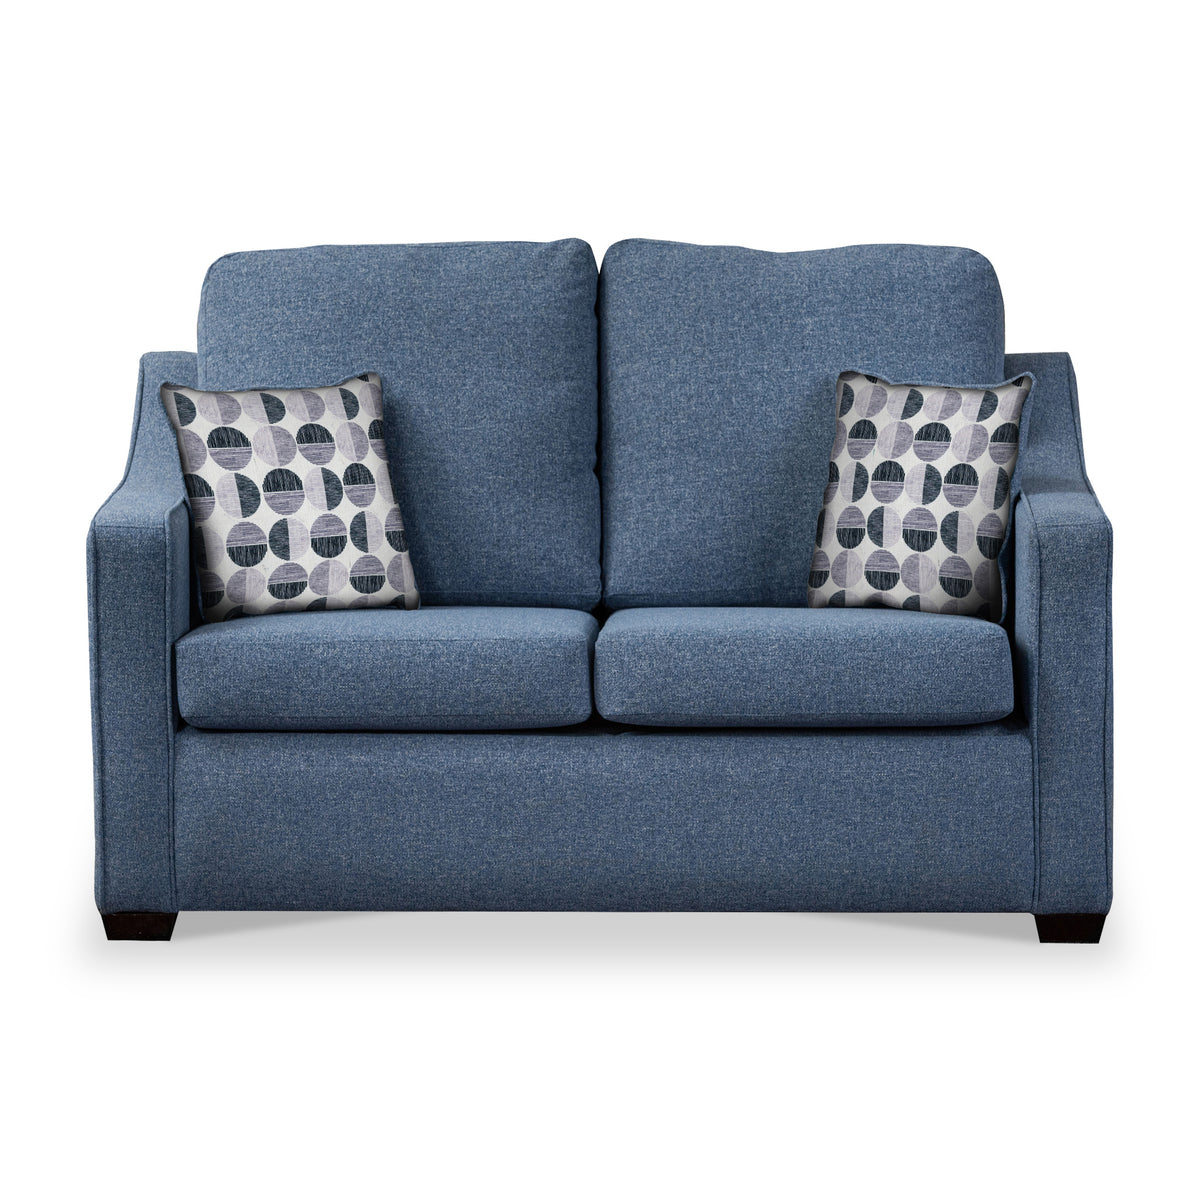 Charlcote Denim Faux Linen 2 Seater Sofabed with Mono Scatter Cushions from Roseland Furniture